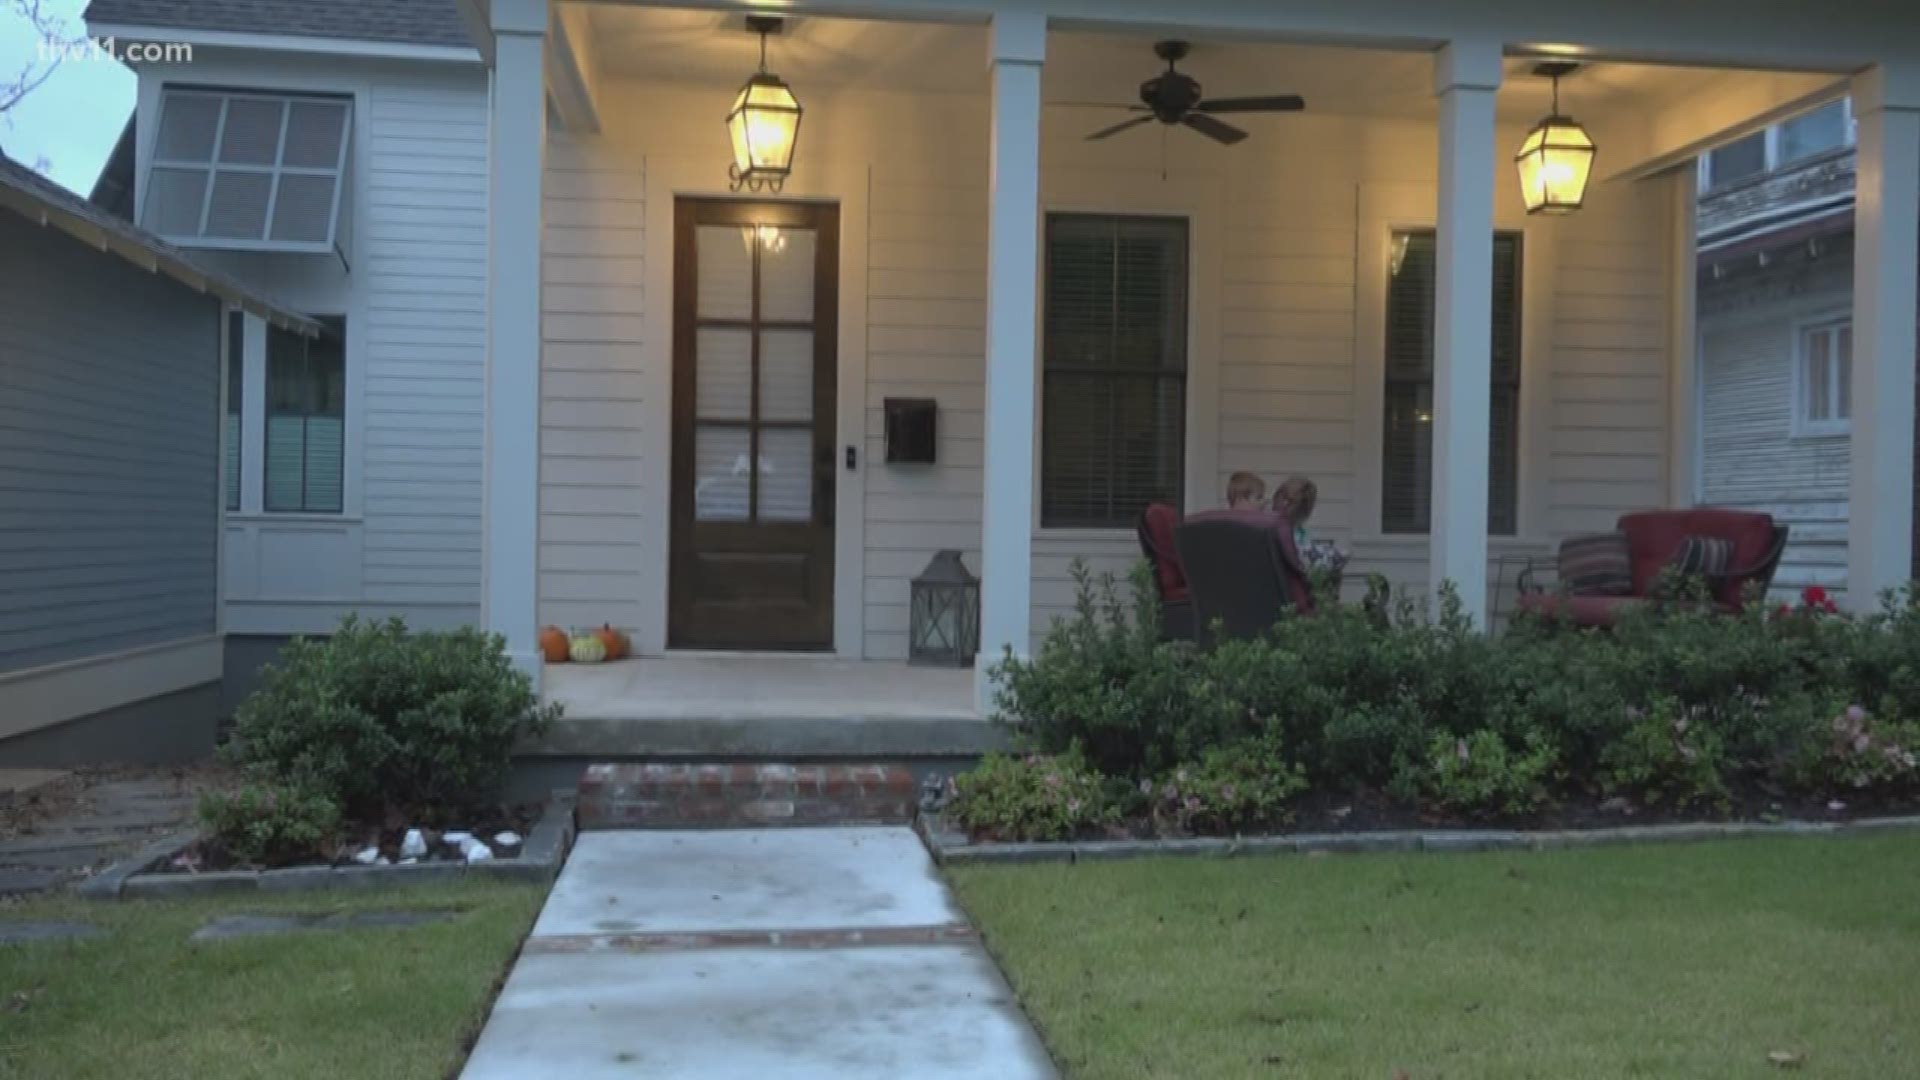 If you have gifts being delivered to your doorstep any time soon, you may want to watch out. Porch pirates are back just in time for the holiday season.